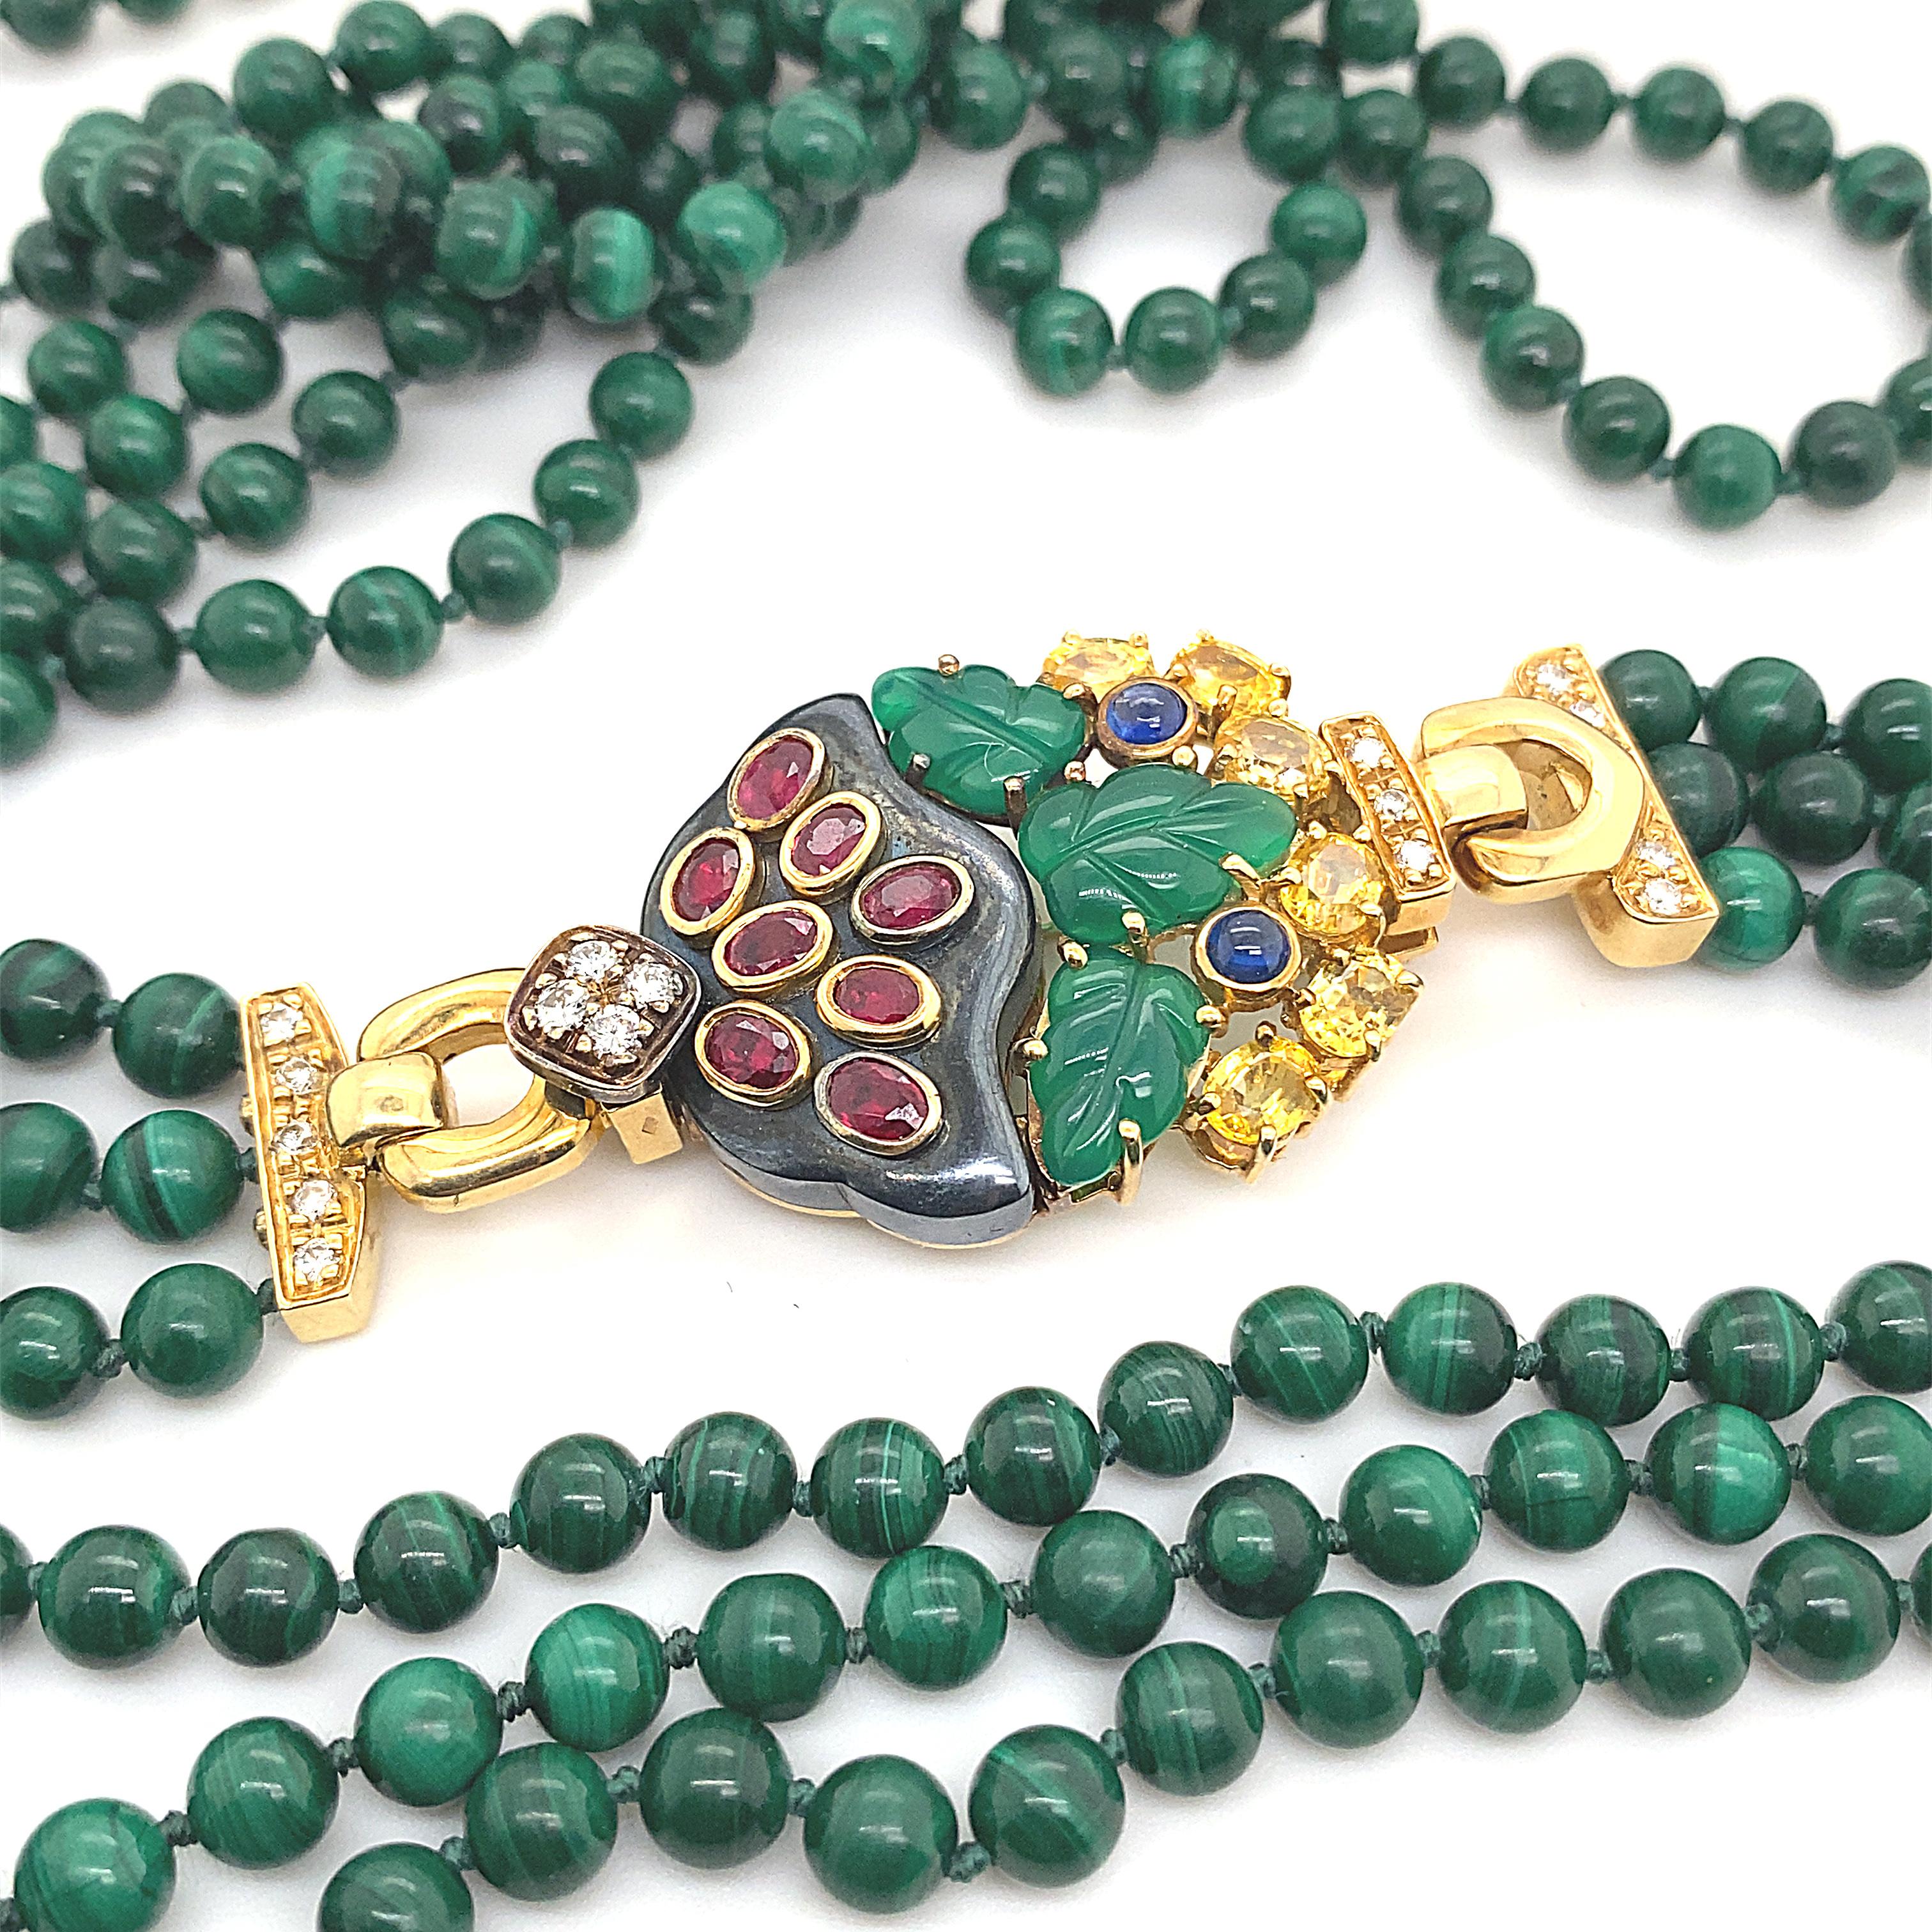 A vintage Cartier hematite, chalcedony, ruby, sapphire, malachite and diamond necklace, circa 1990.

This exceptional malachite three row bead sautoir necklace in 18 karat yellow gold features a flower pot shaped brooch, crafted in hematite with a